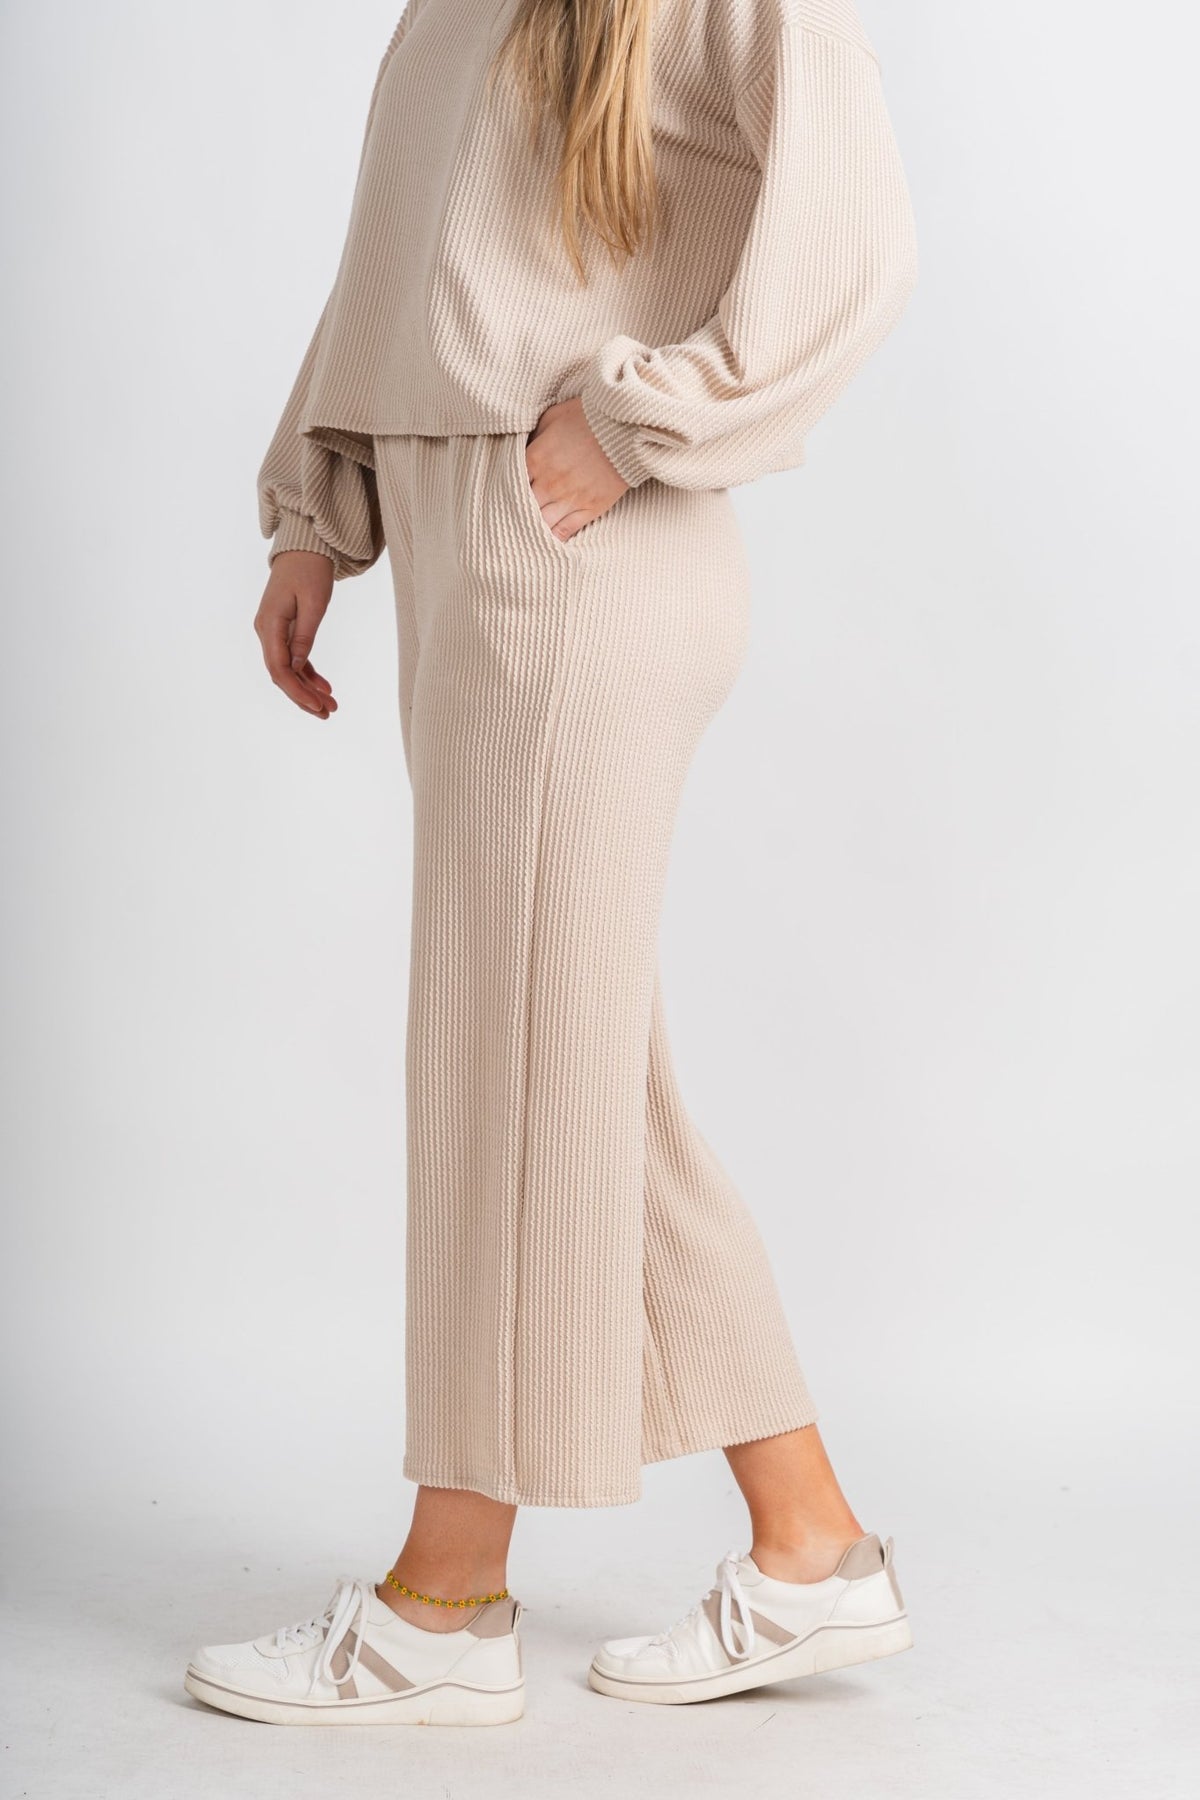 Manifest ribbed pants taupe - Trendy Pants - Cute Loungewear Collection at Lush Fashion Lounge Boutique in Oklahoma City